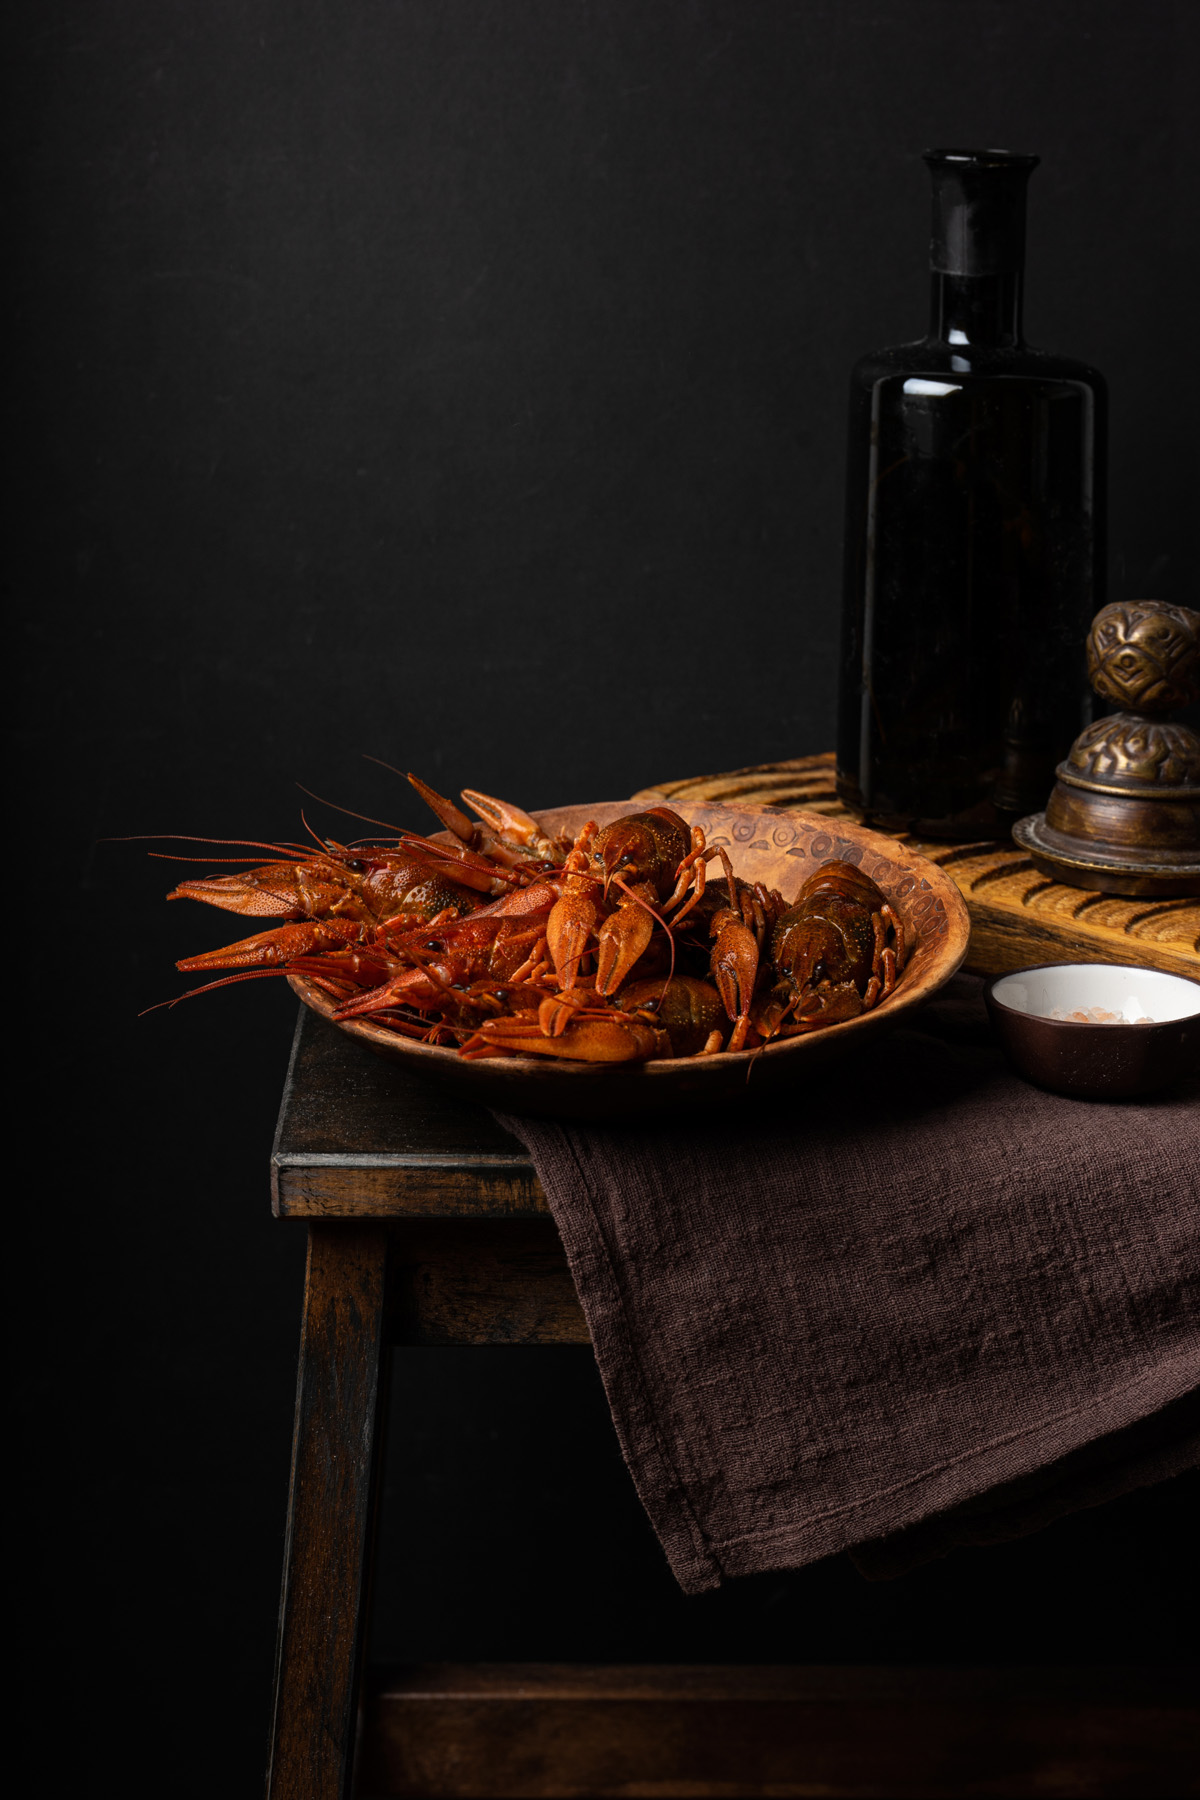 Crayfishes The Remarkable Still Life Photography Of Elena Otvodenko